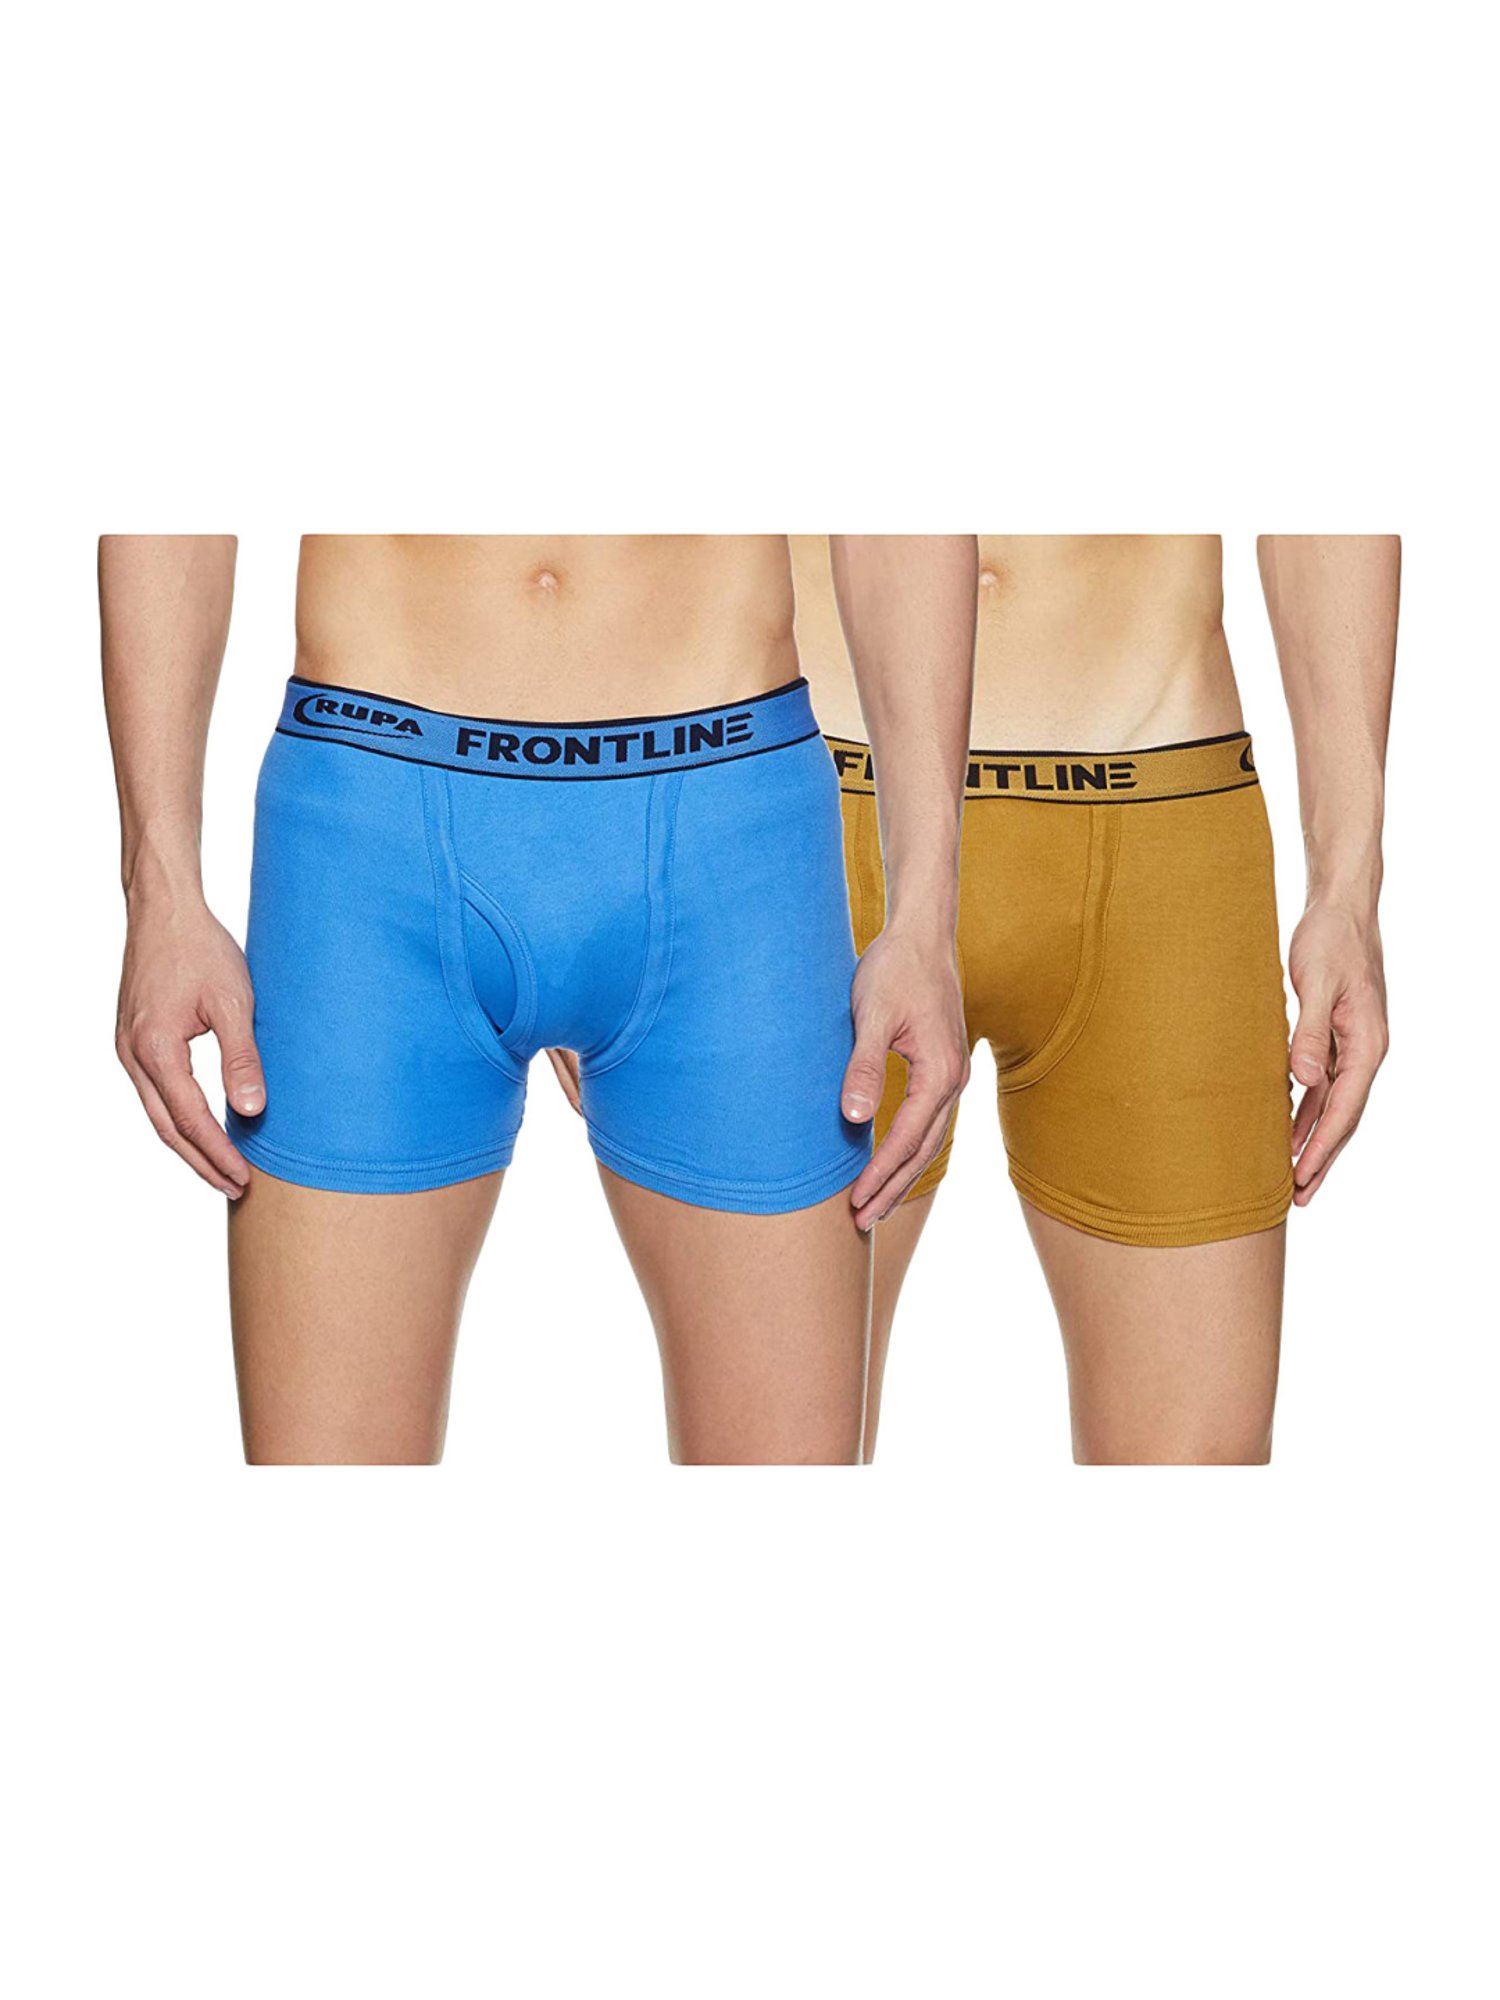 Rupa Frontline Men's Cotton Brief(Colors and Prints May Vary)